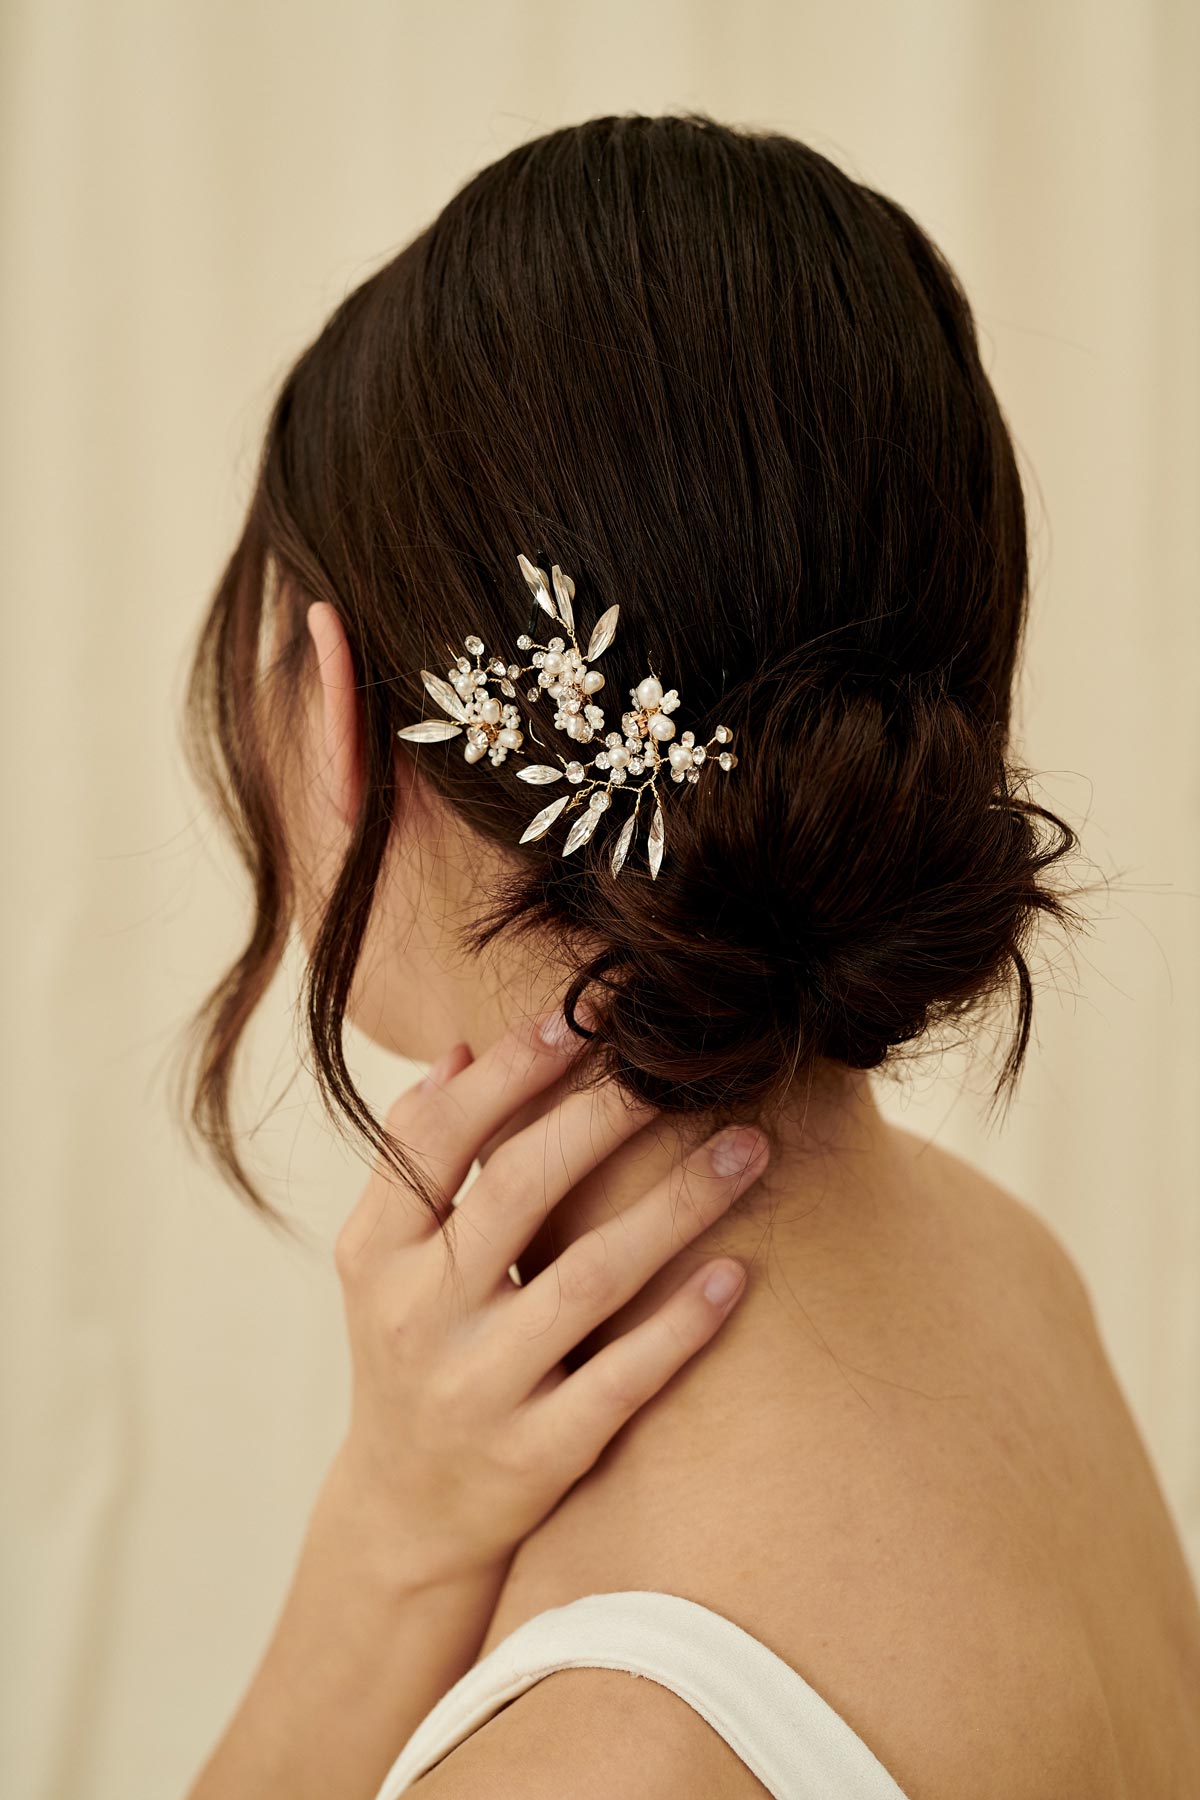 Small cluster hairpins, bridal hair accessory with small crystal clusters, pearls, and seed beads